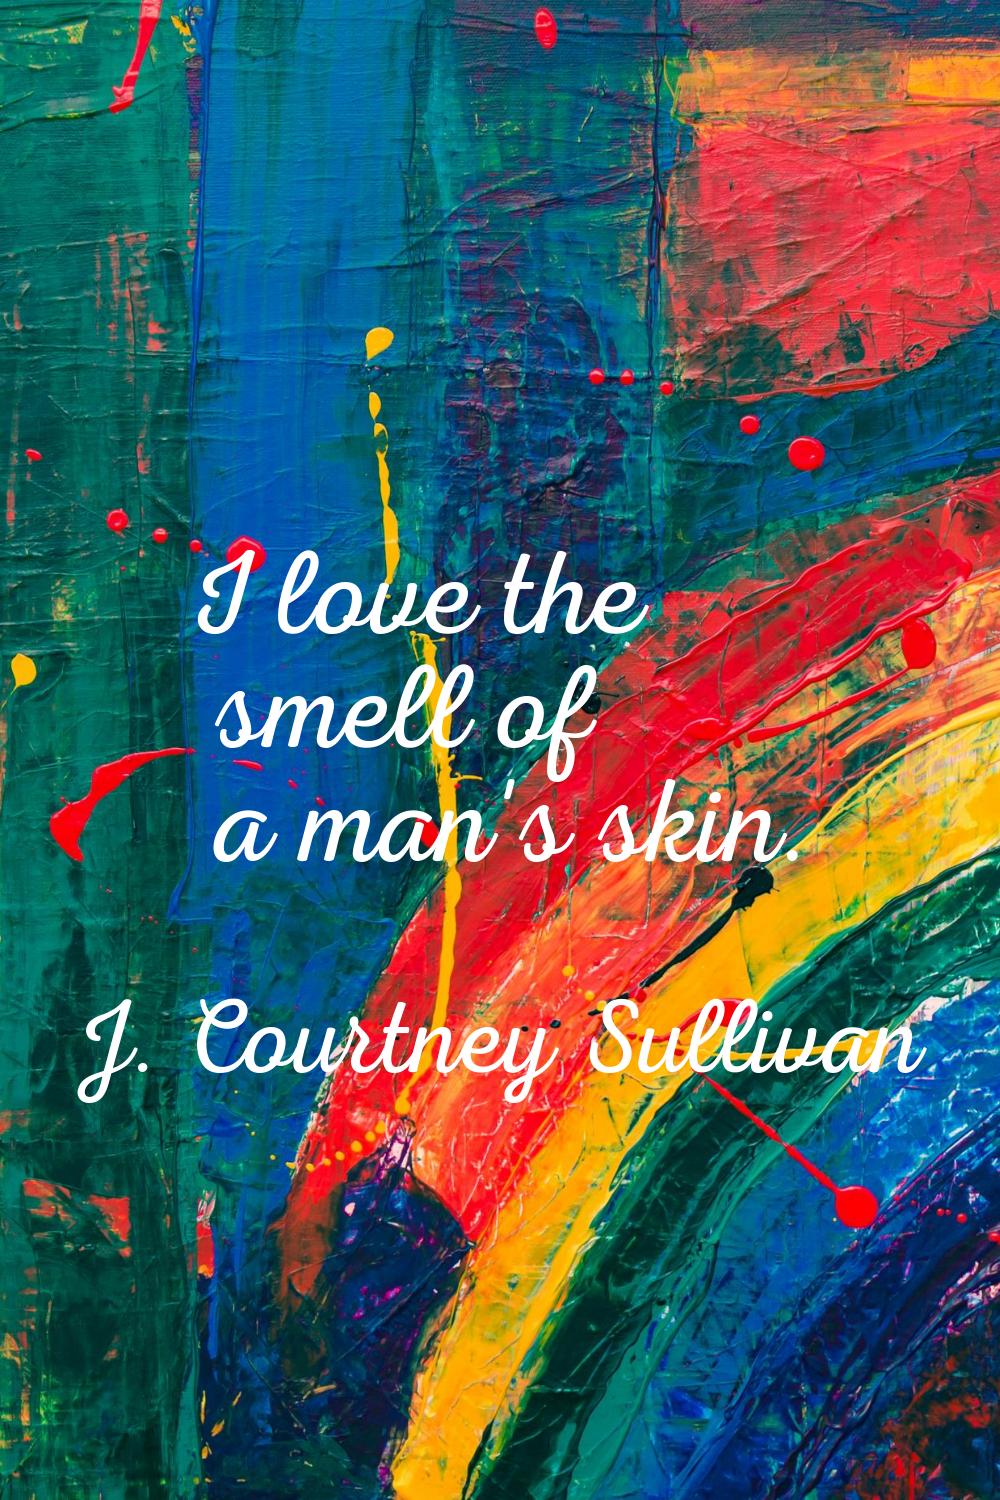 I love the smell of a man's skin.